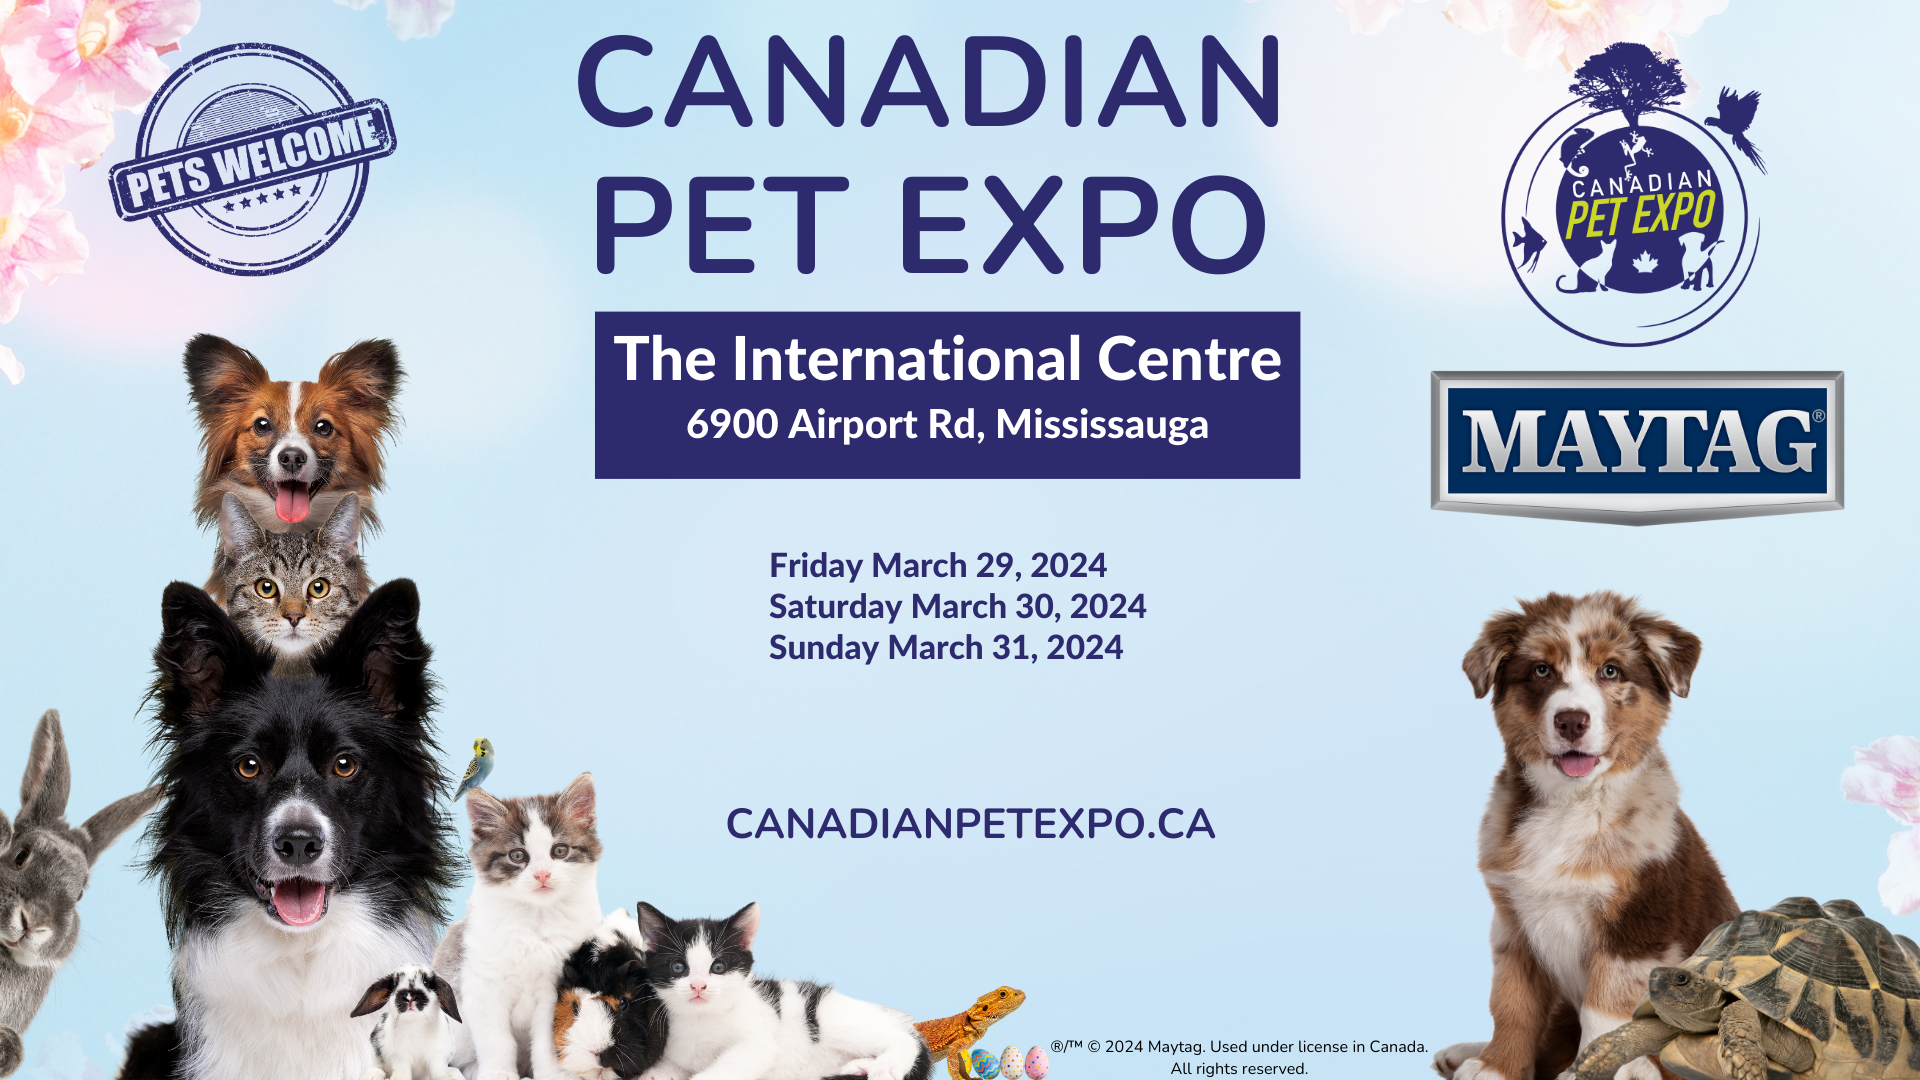 Spring Canadian Pet Expo